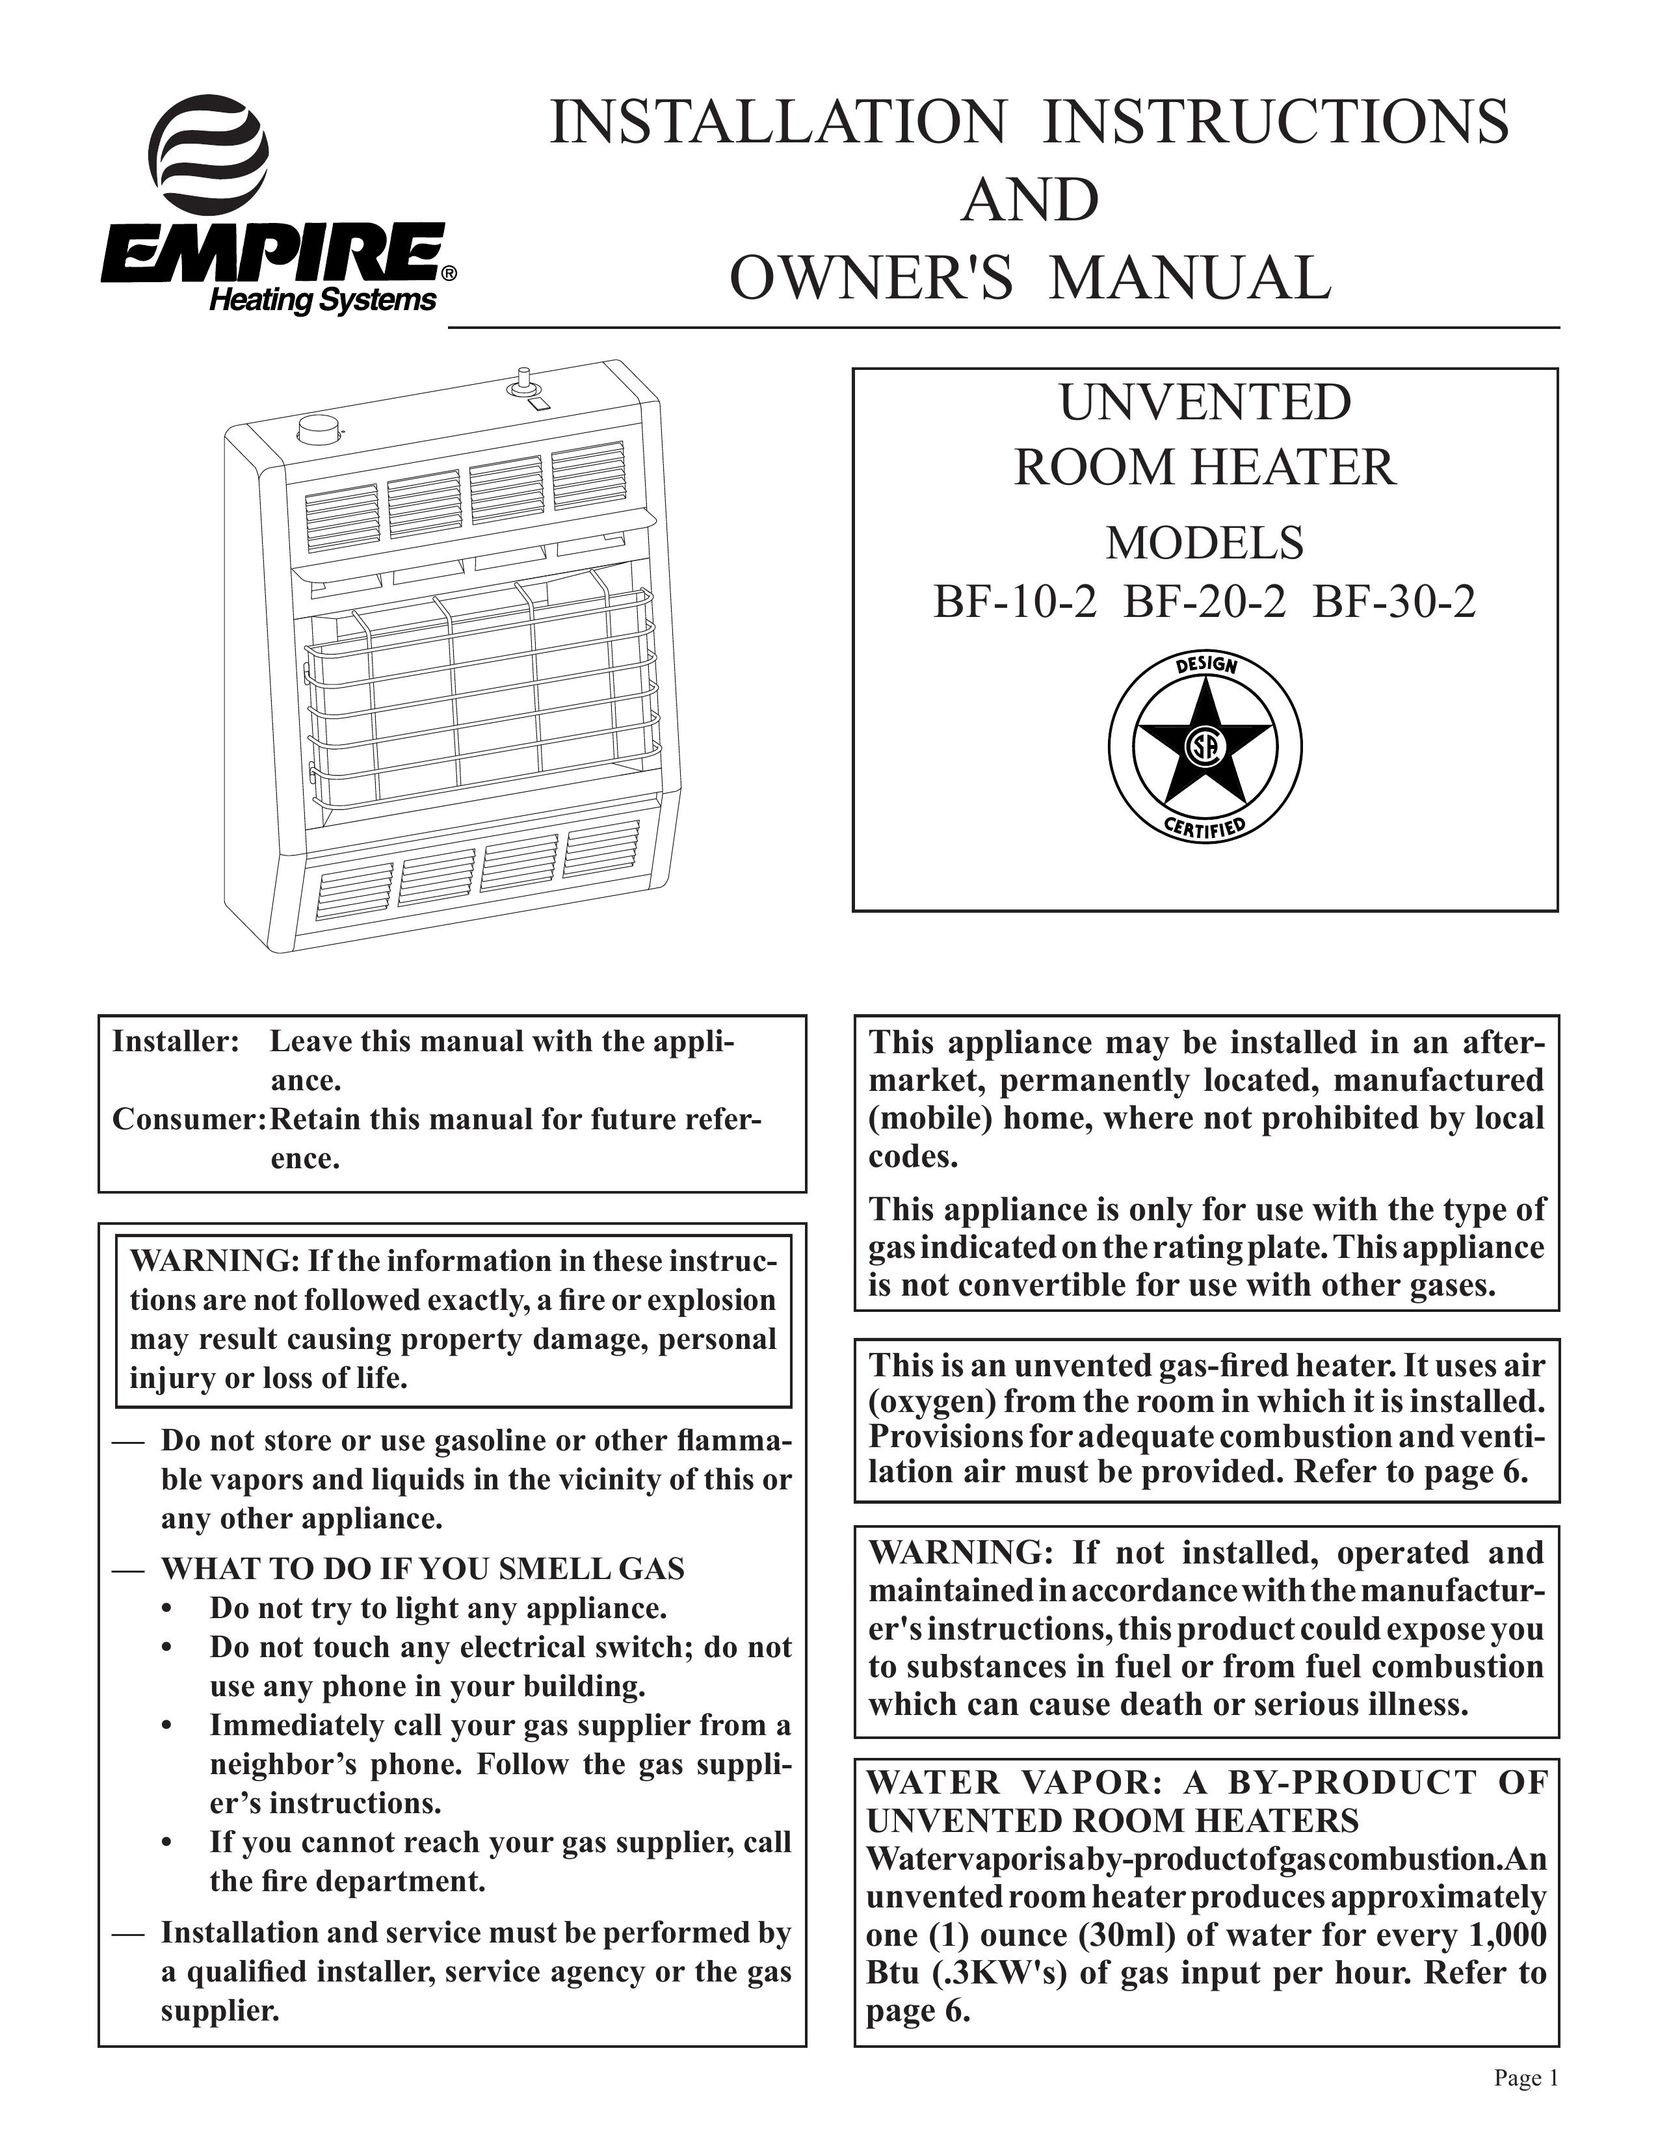 Empire Comfort Systems BF-20-2 Electric Heater User Manual (Page 1)